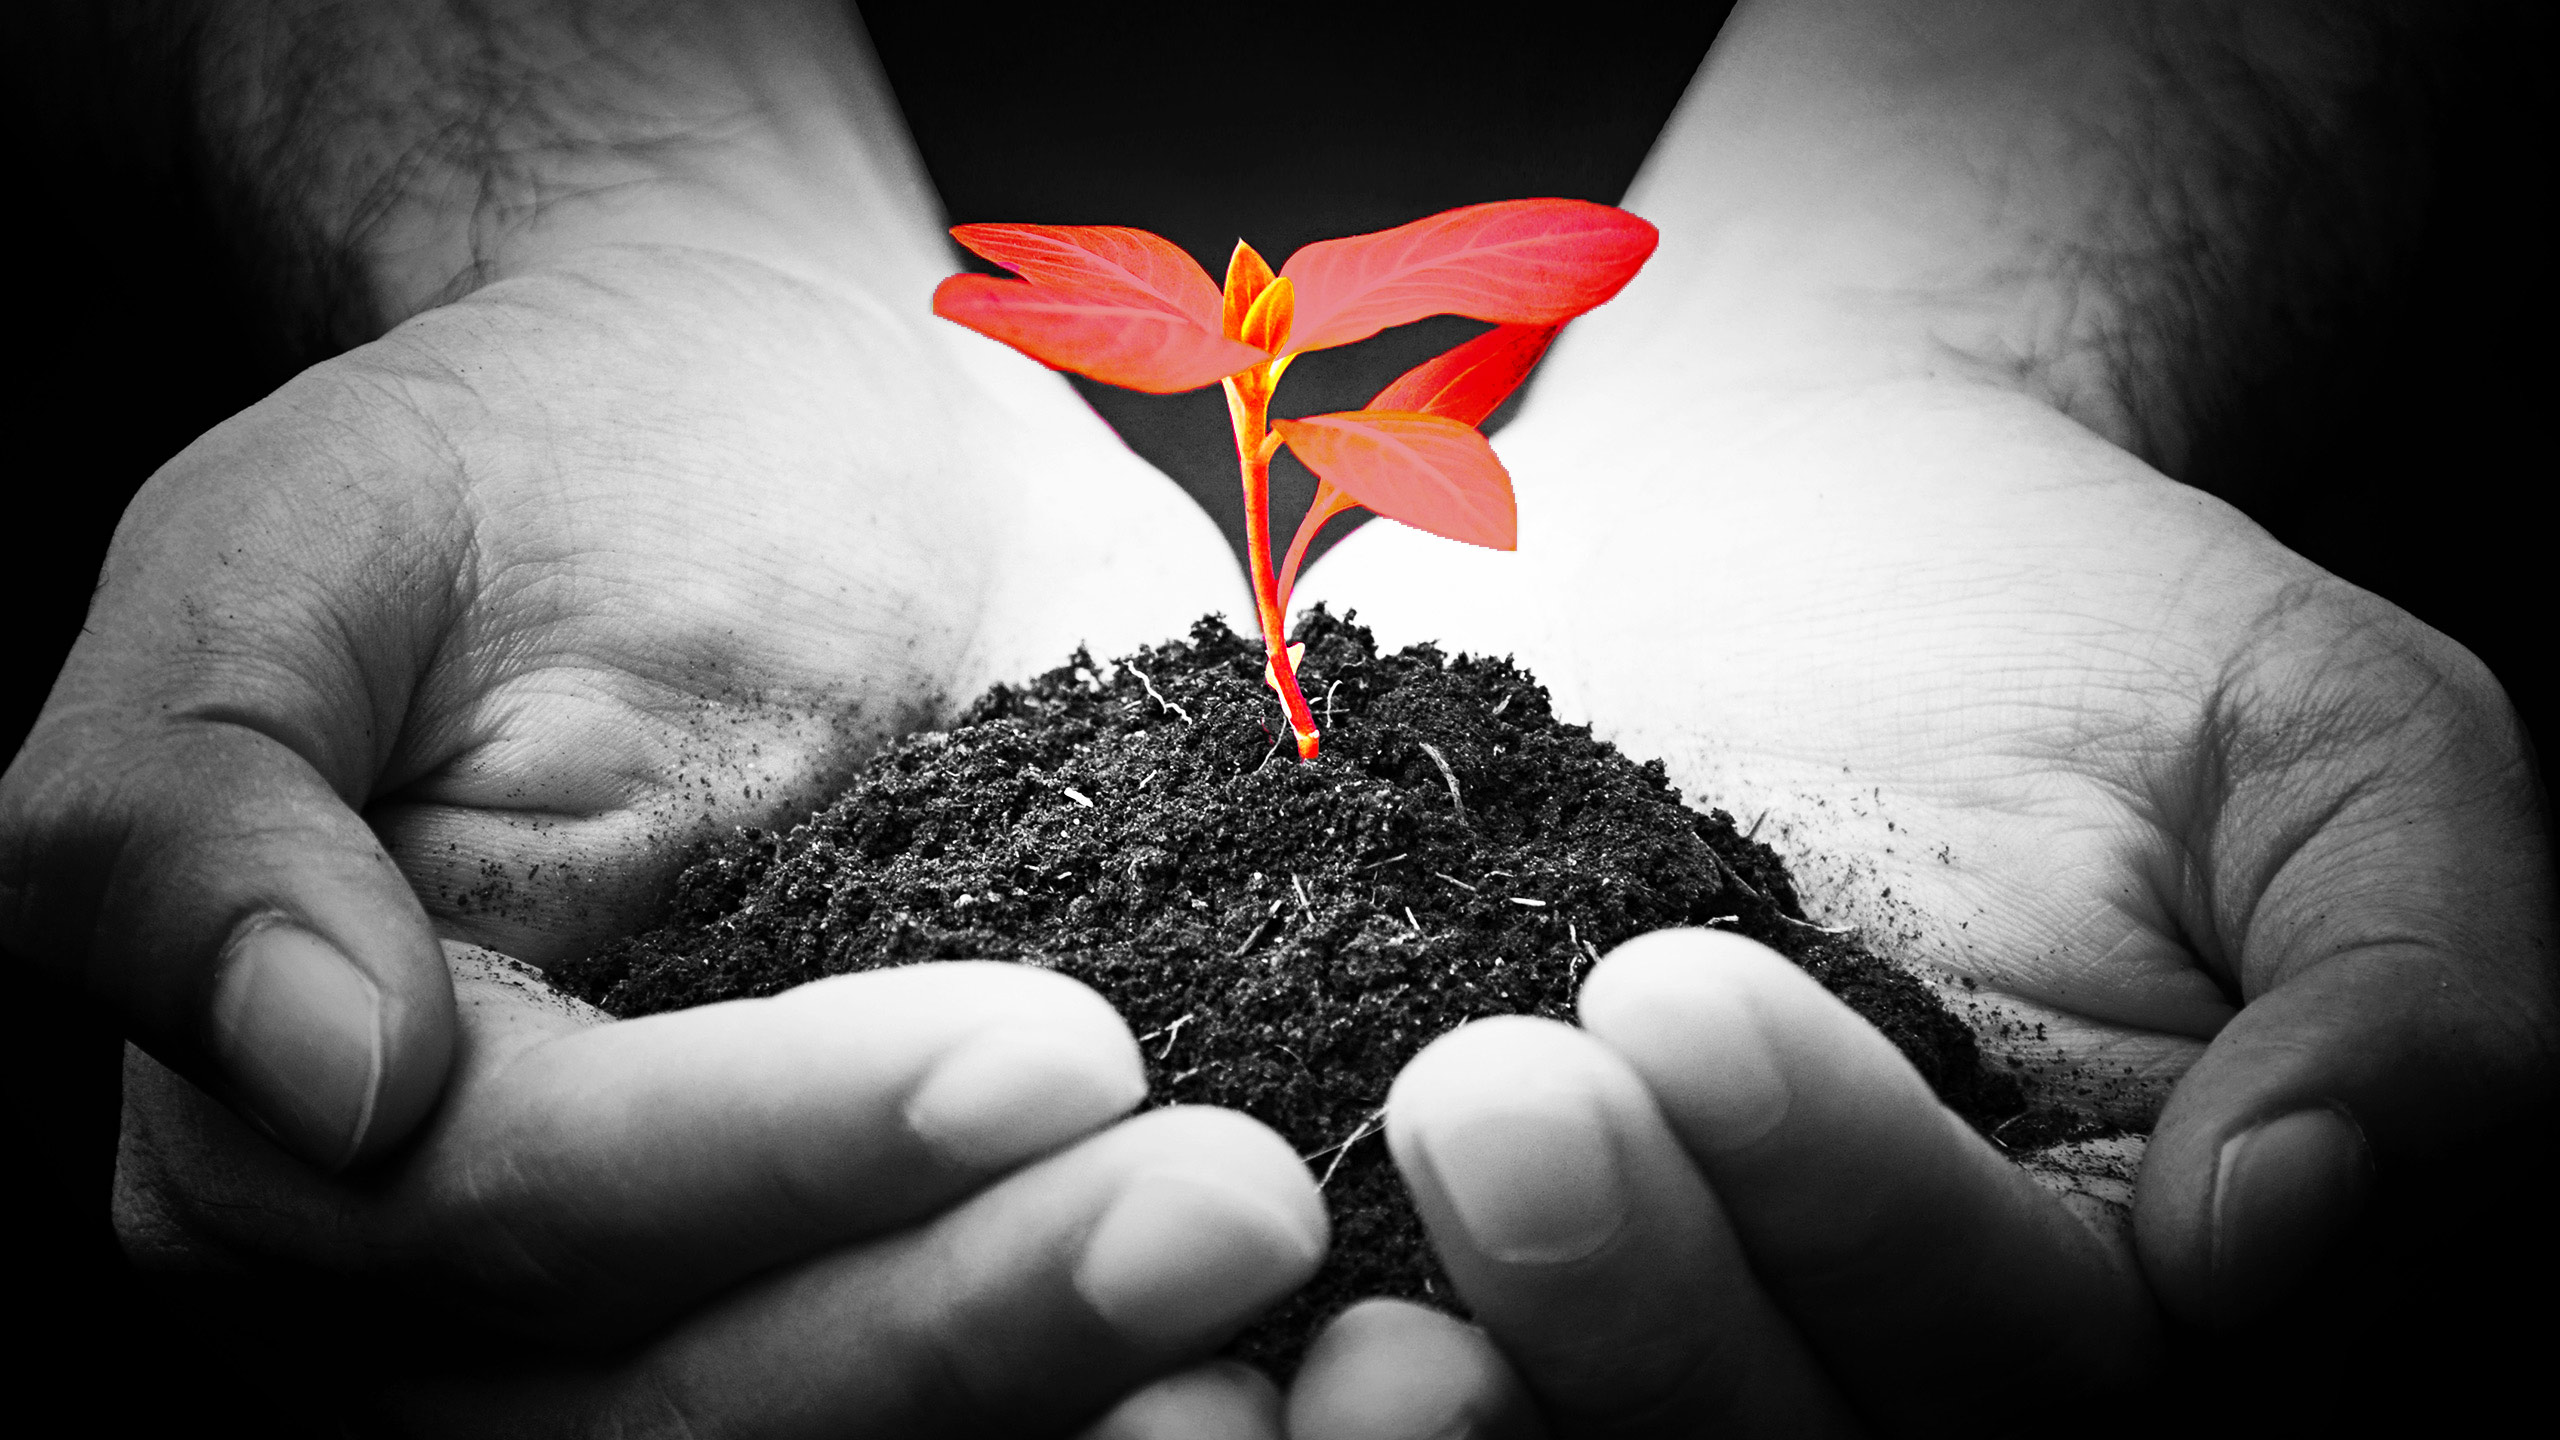 Two cupped hands holding dirt with a small red plant sprouting out of the dirt